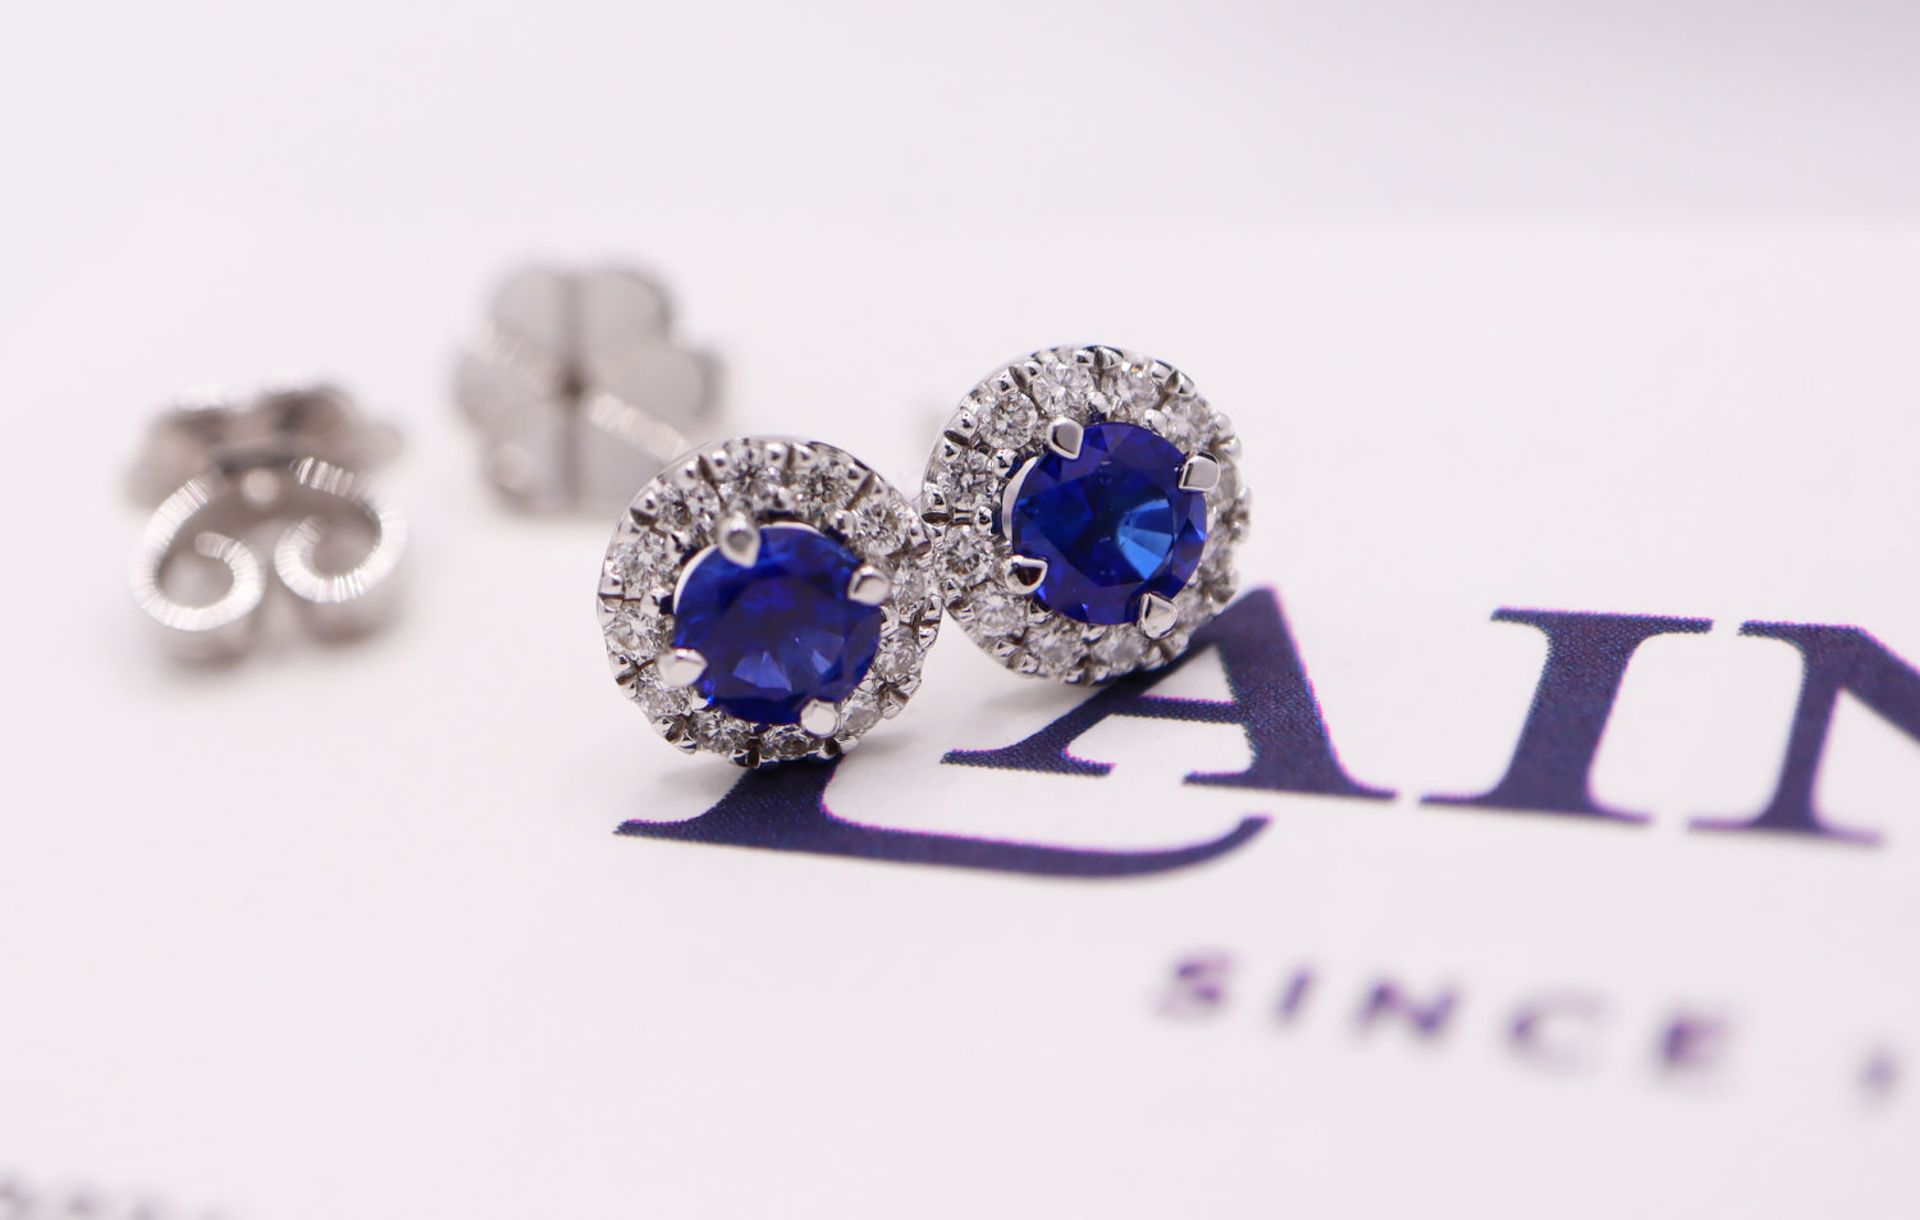 18K WHITE GOLD - 1.01CT SAPPHIRE & DIAMOND STUD EARRINGS; with LAINGS Original Receipt / Certificate - Image 8 of 8